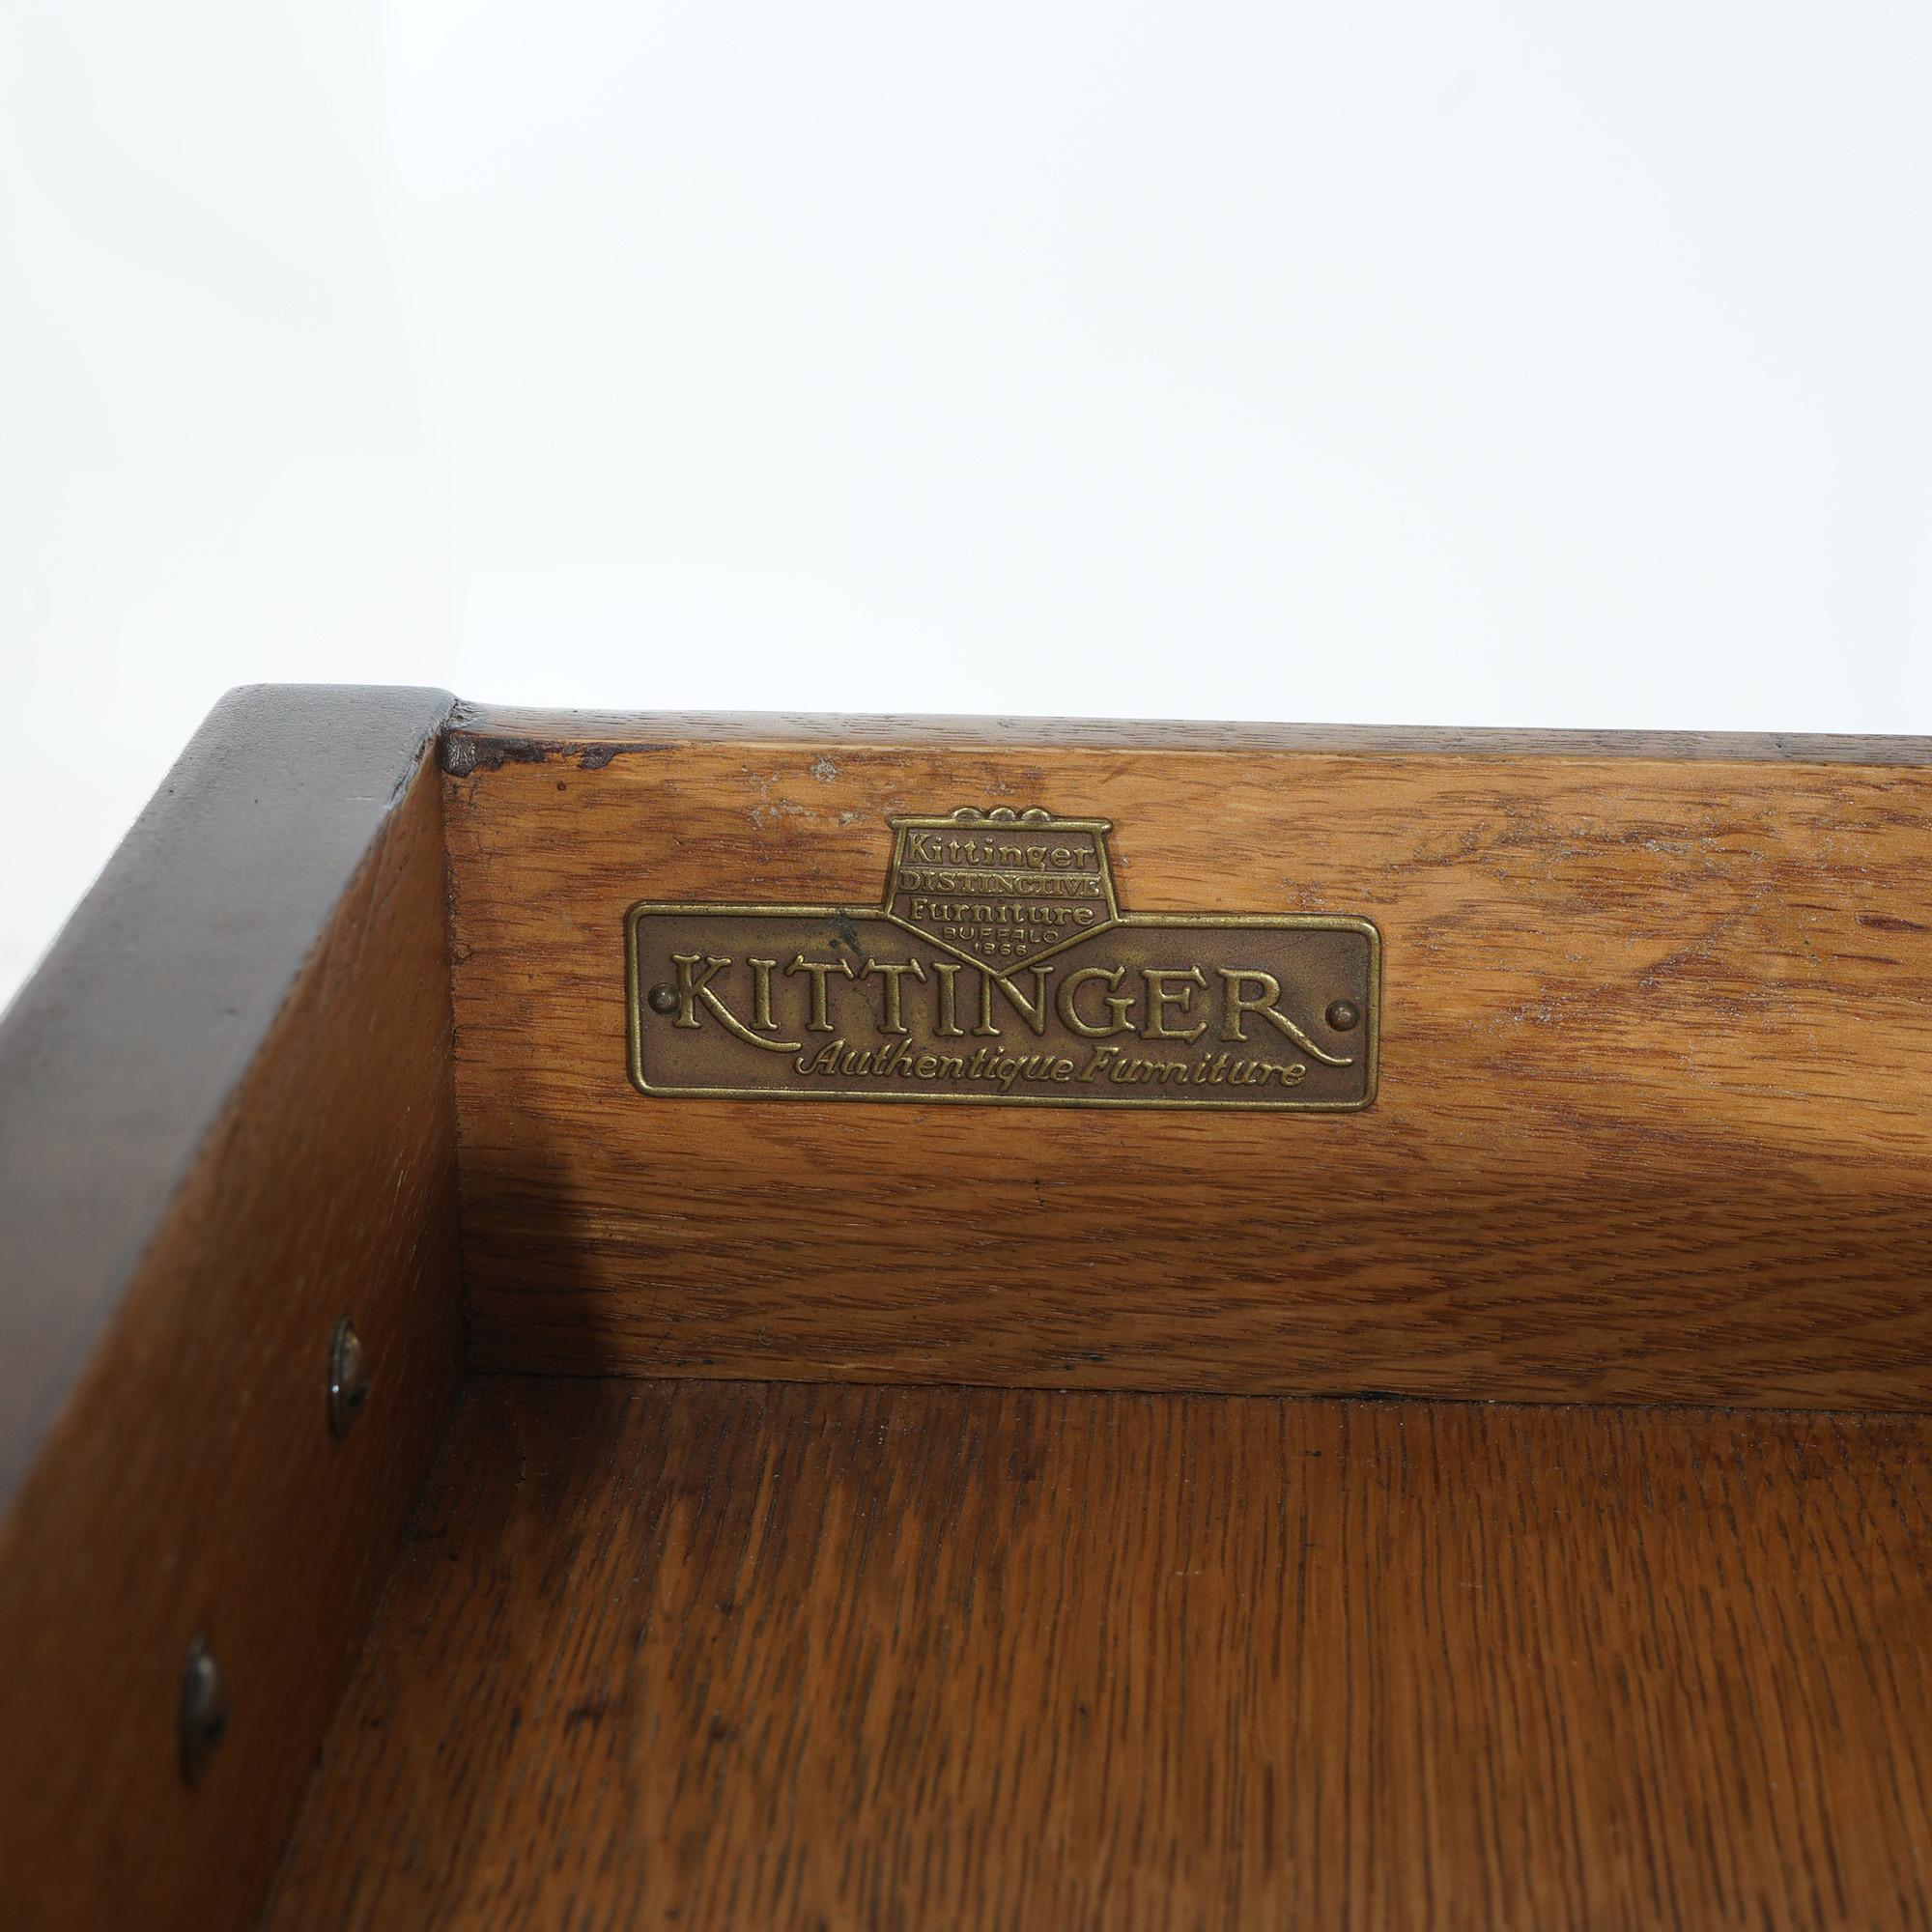 Kittinger Chippendale Style Mahogany Knee Hole Desk with Drawer Towers 20thC For Sale 6